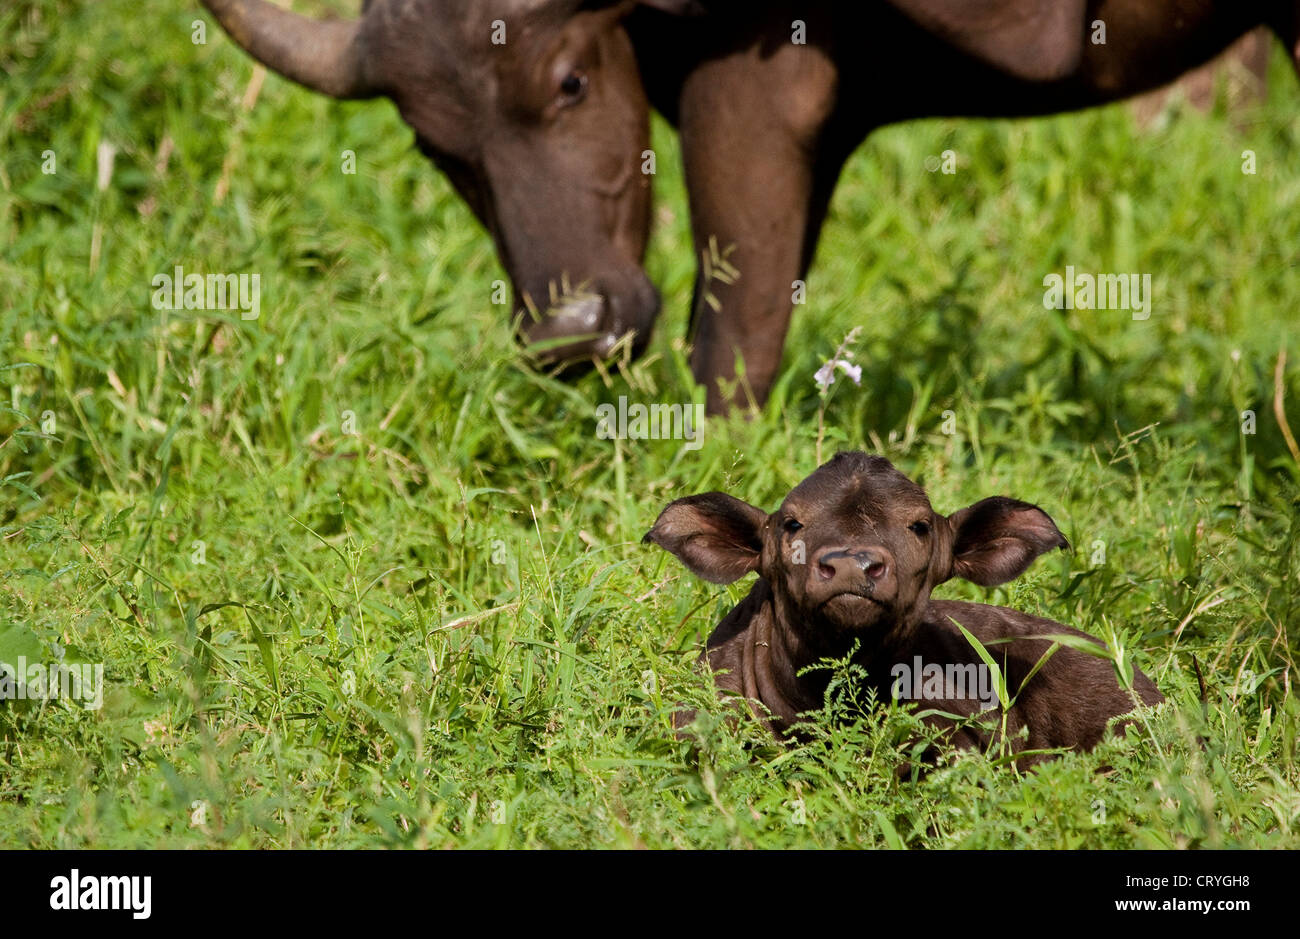 Buffalo with young calf in the foreground Stock Photo